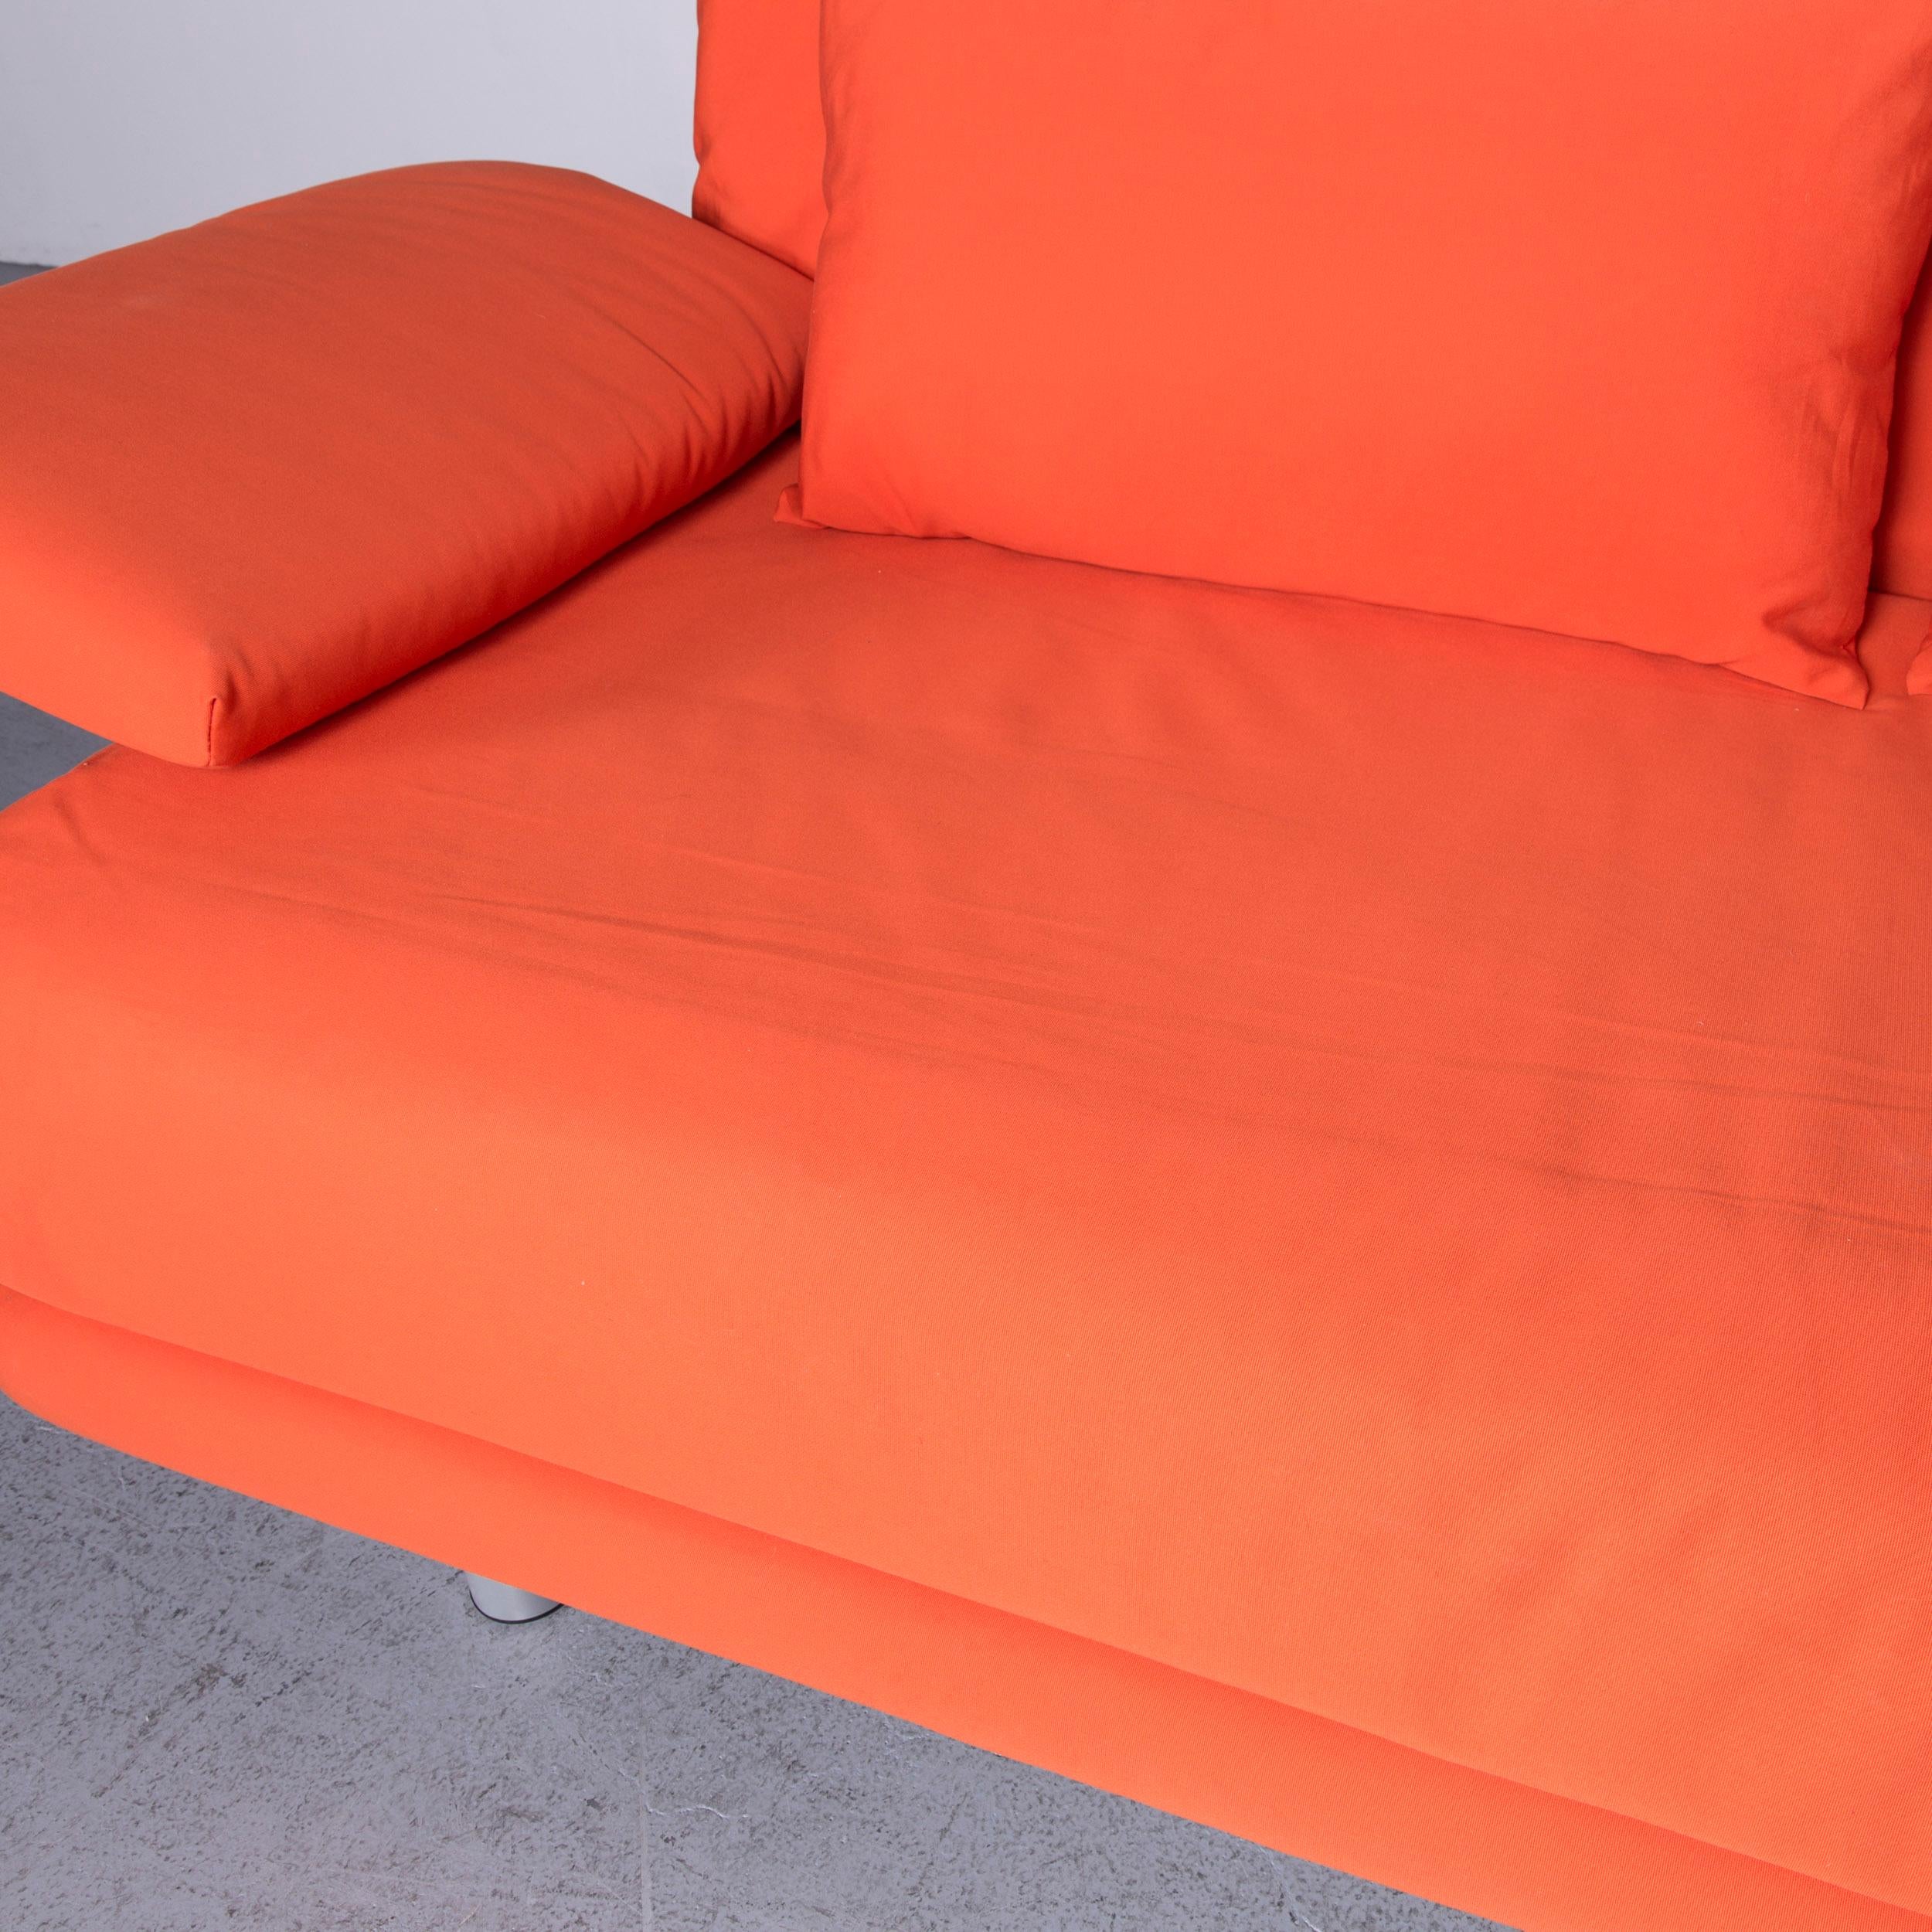 Ligne Roset Multy Fabric Sofa-Bed Orange Two-Seat Couch Sleep Function 1